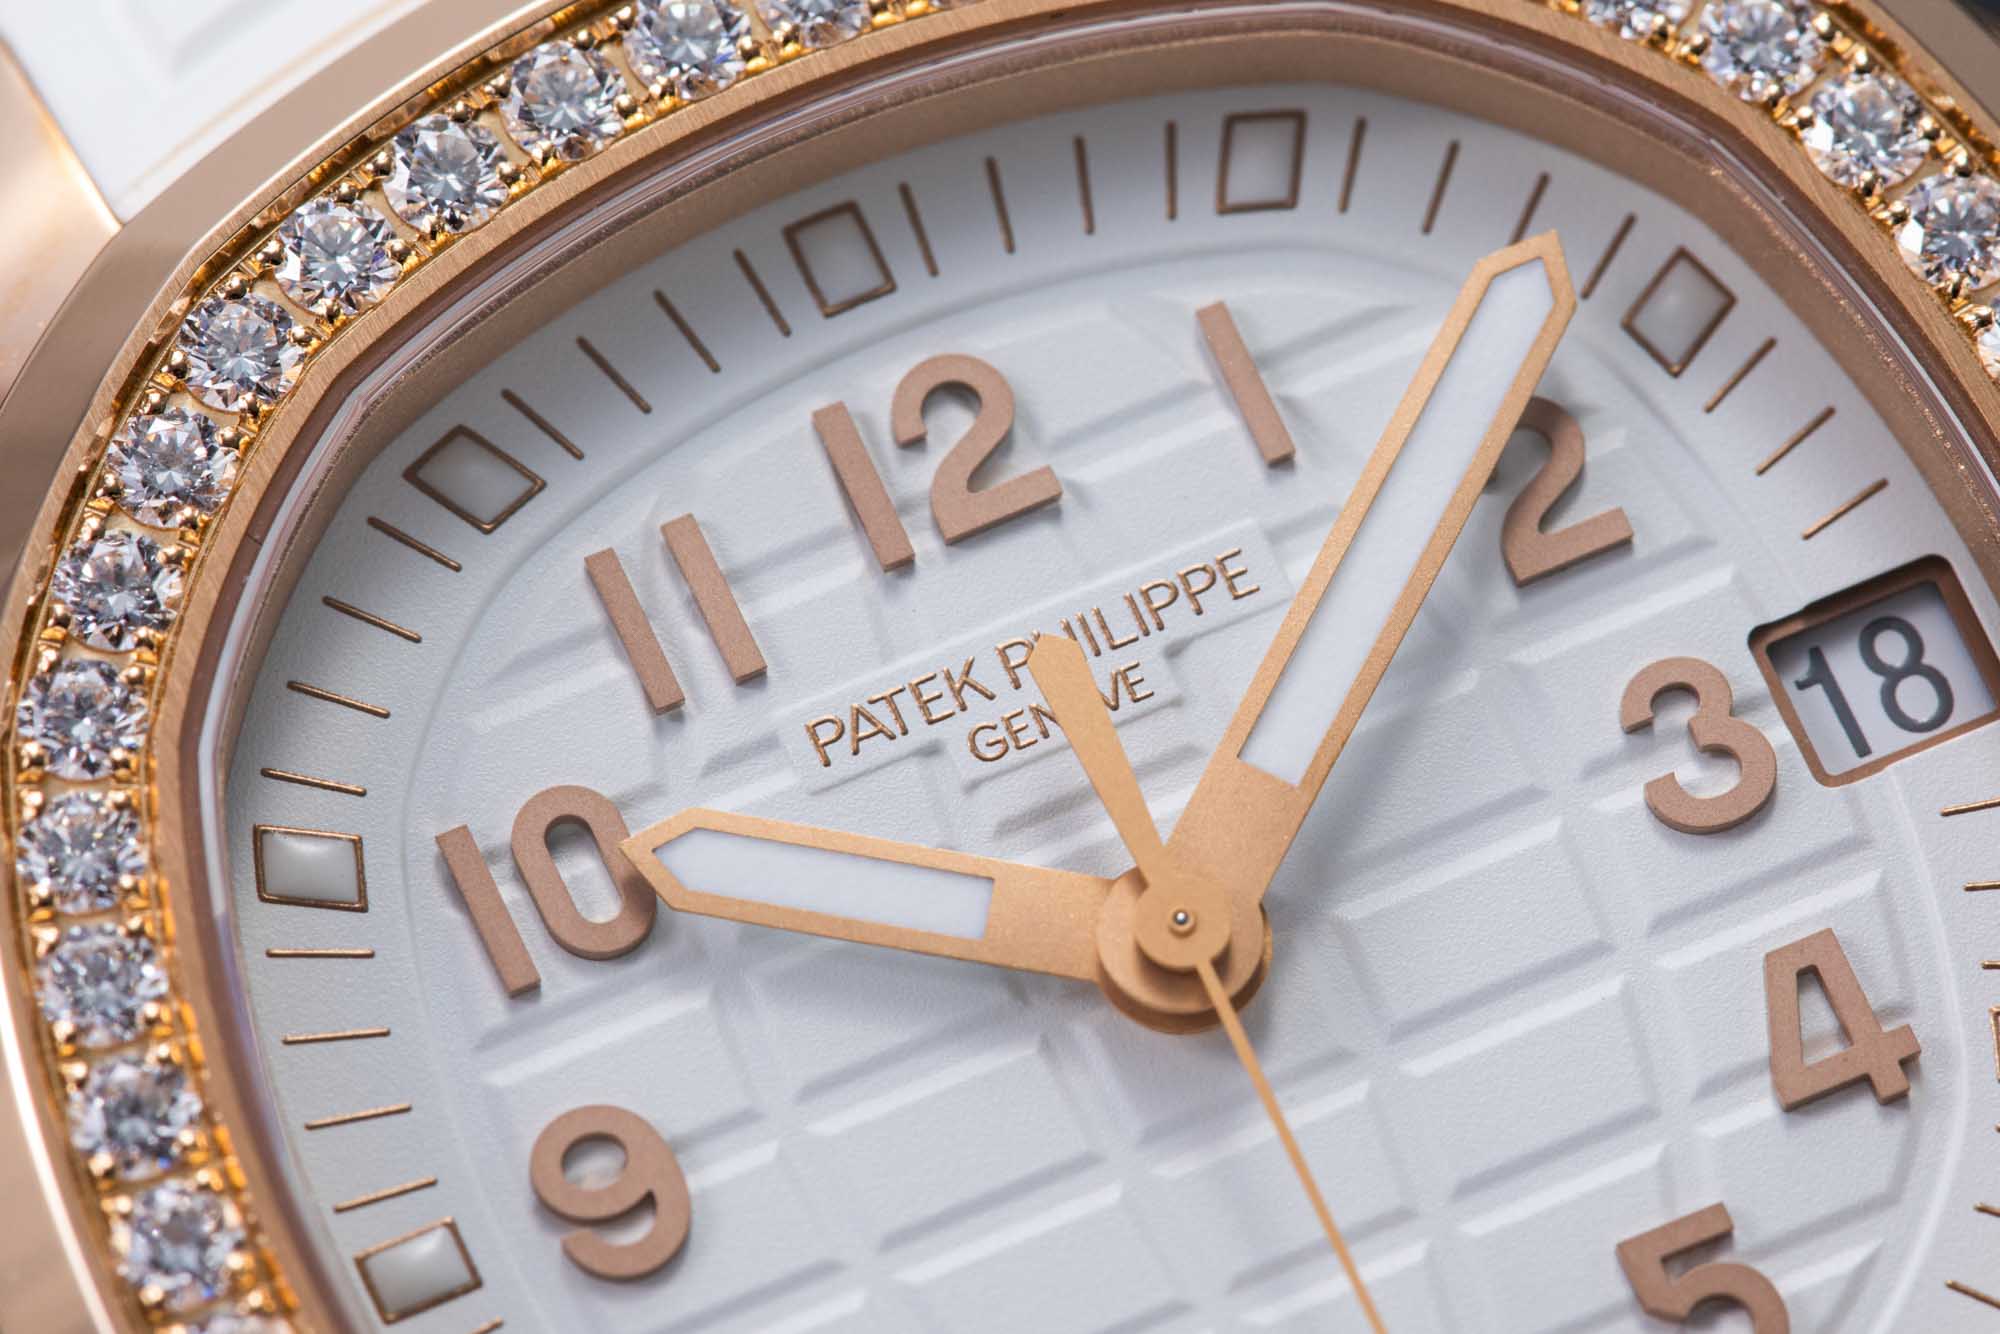 The new Patek Philippe Aquanaut Luce Automatic model Ref. 5268/200R-001 features a diamond-set rose gold bezel. A play on polished and satin-brushed finishes enhances its rose gold case.